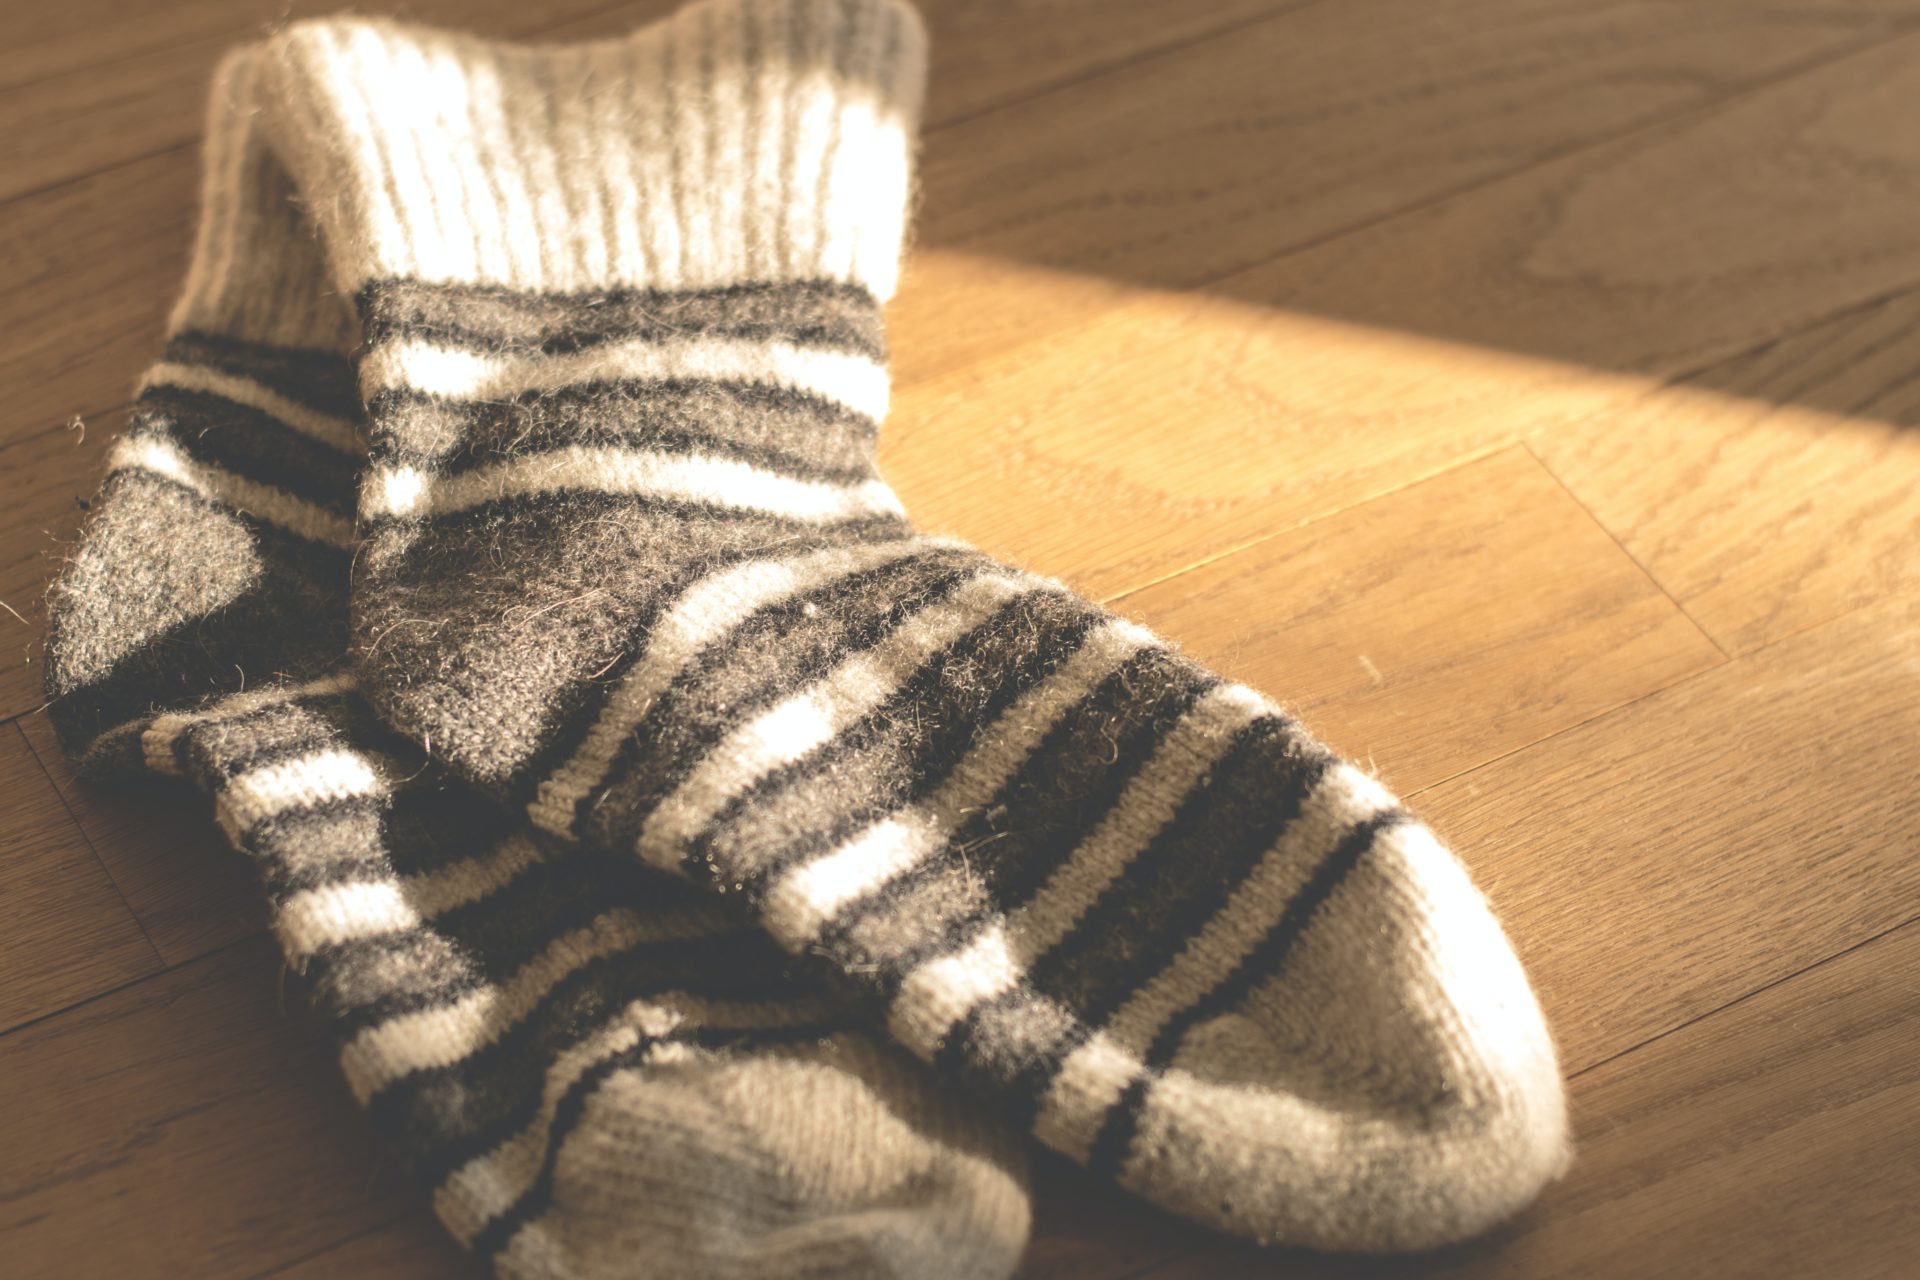 A pair of white and gray striped fuzzy socks are sitting on a light wood floor.